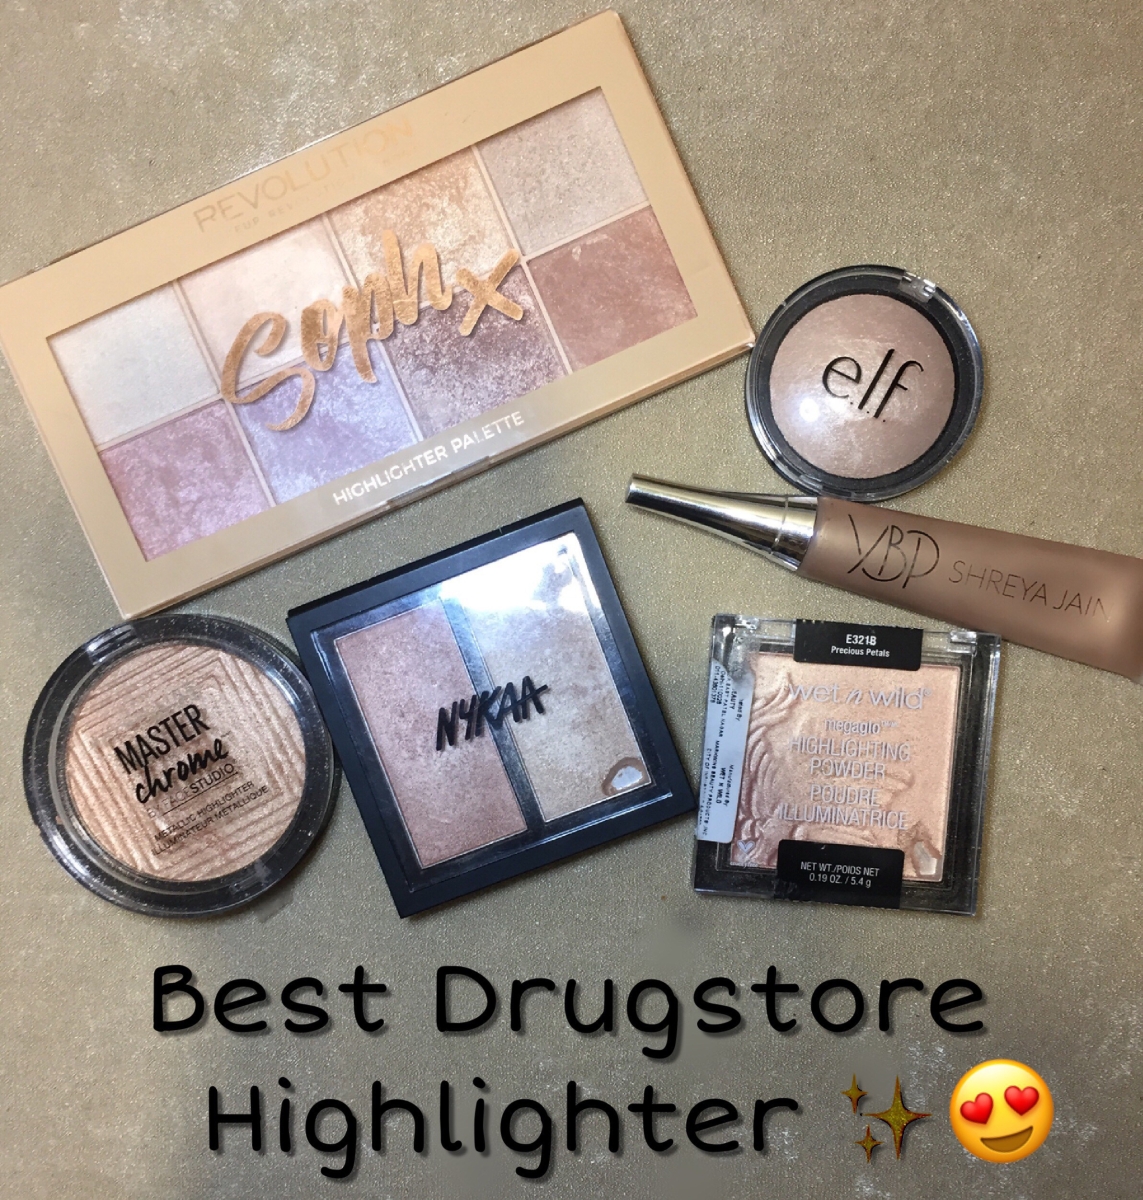 Glow Up with Affordable Drugstore Highlighters